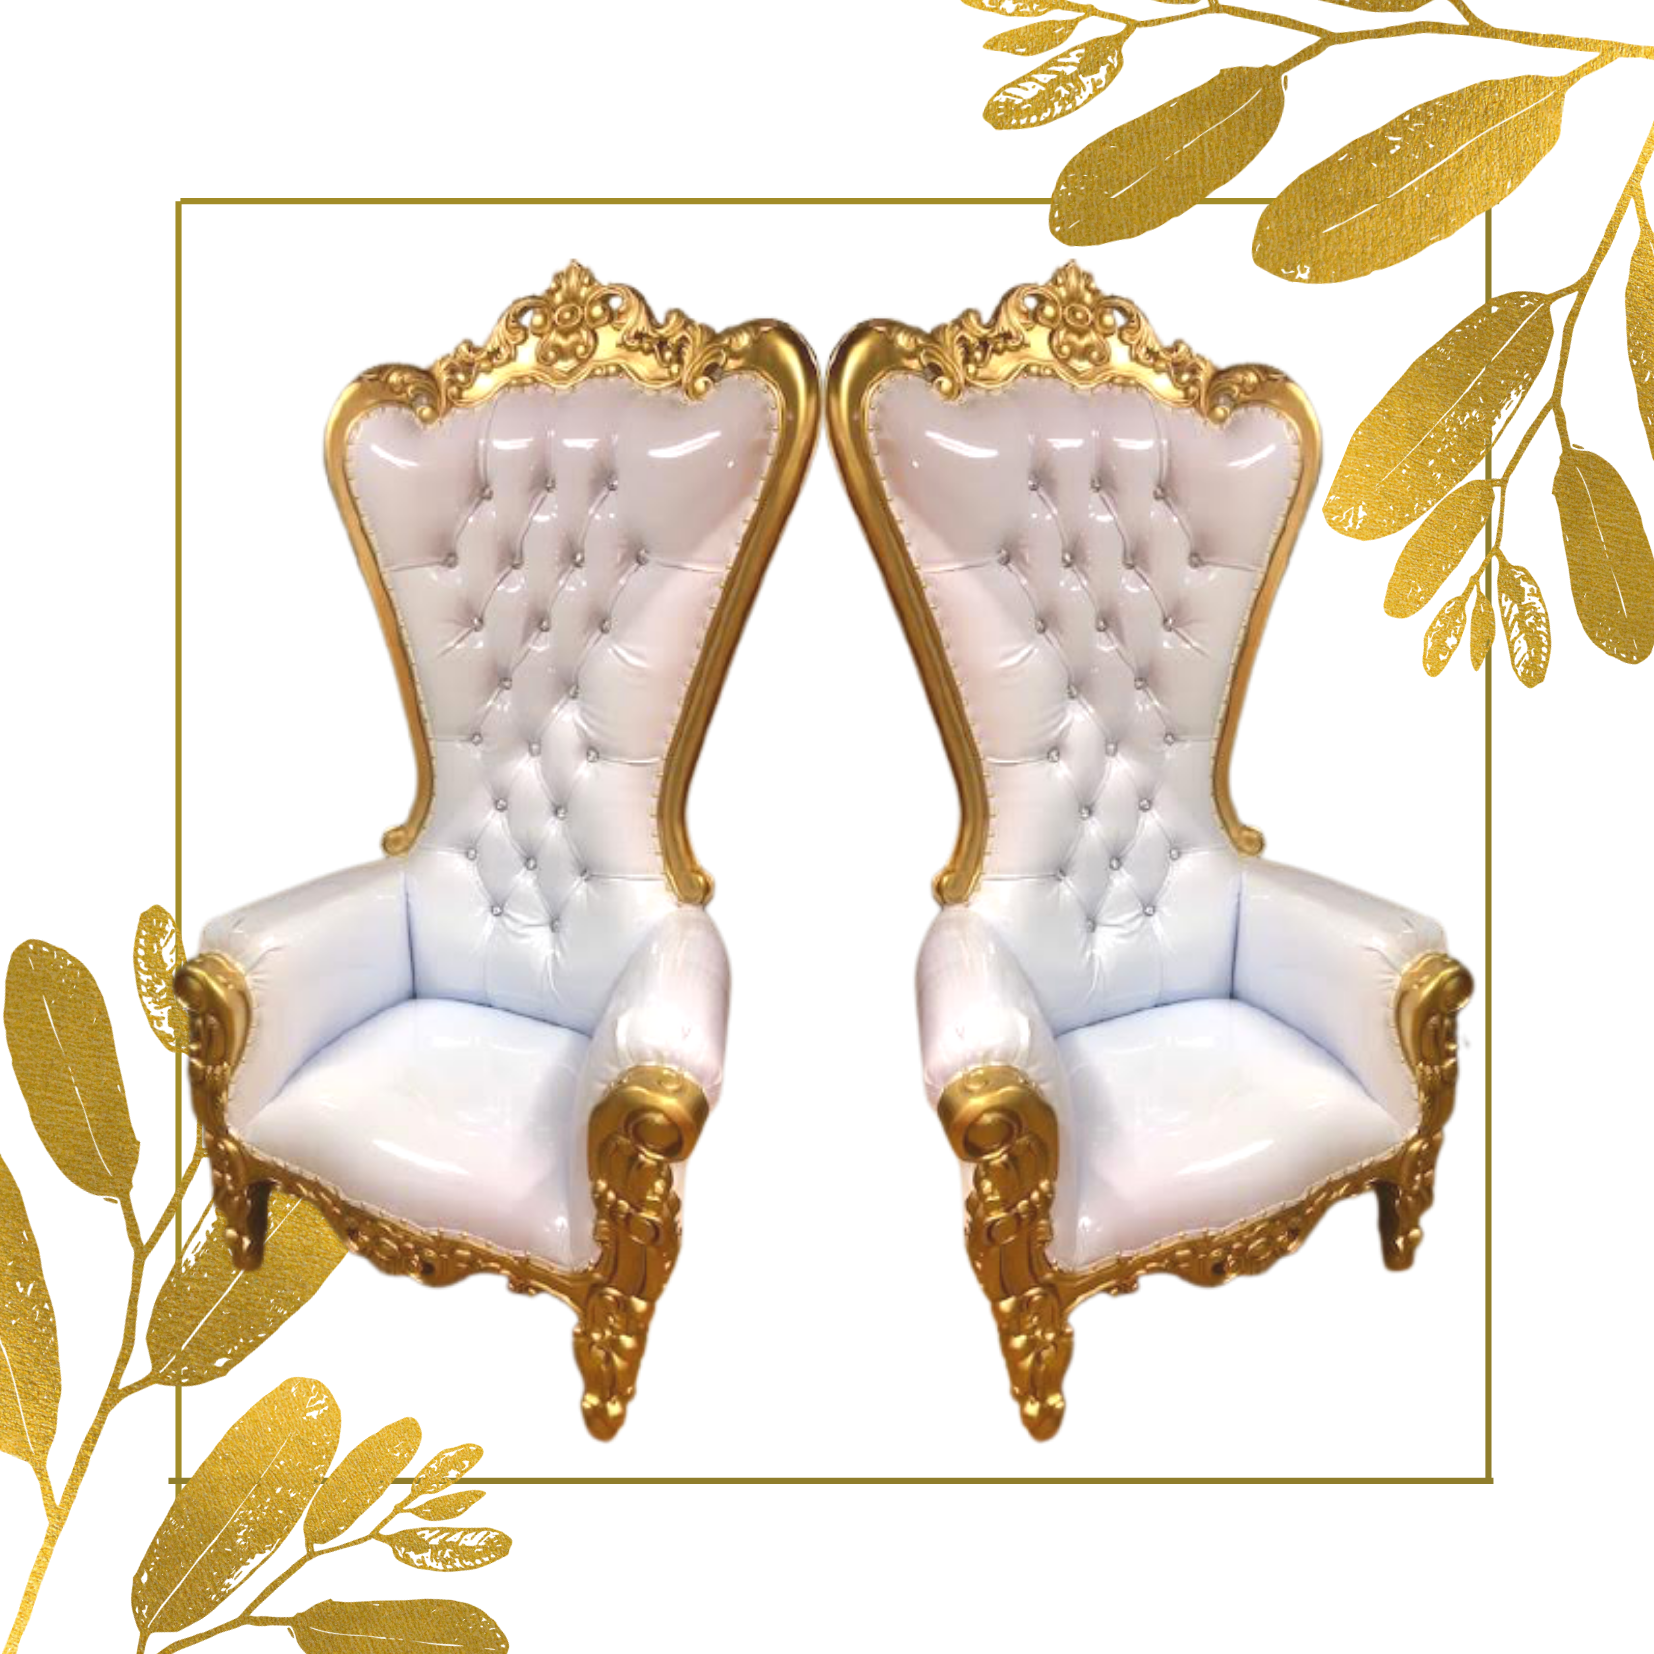 Book now for - King & Queen Thrones Chairs - for rental